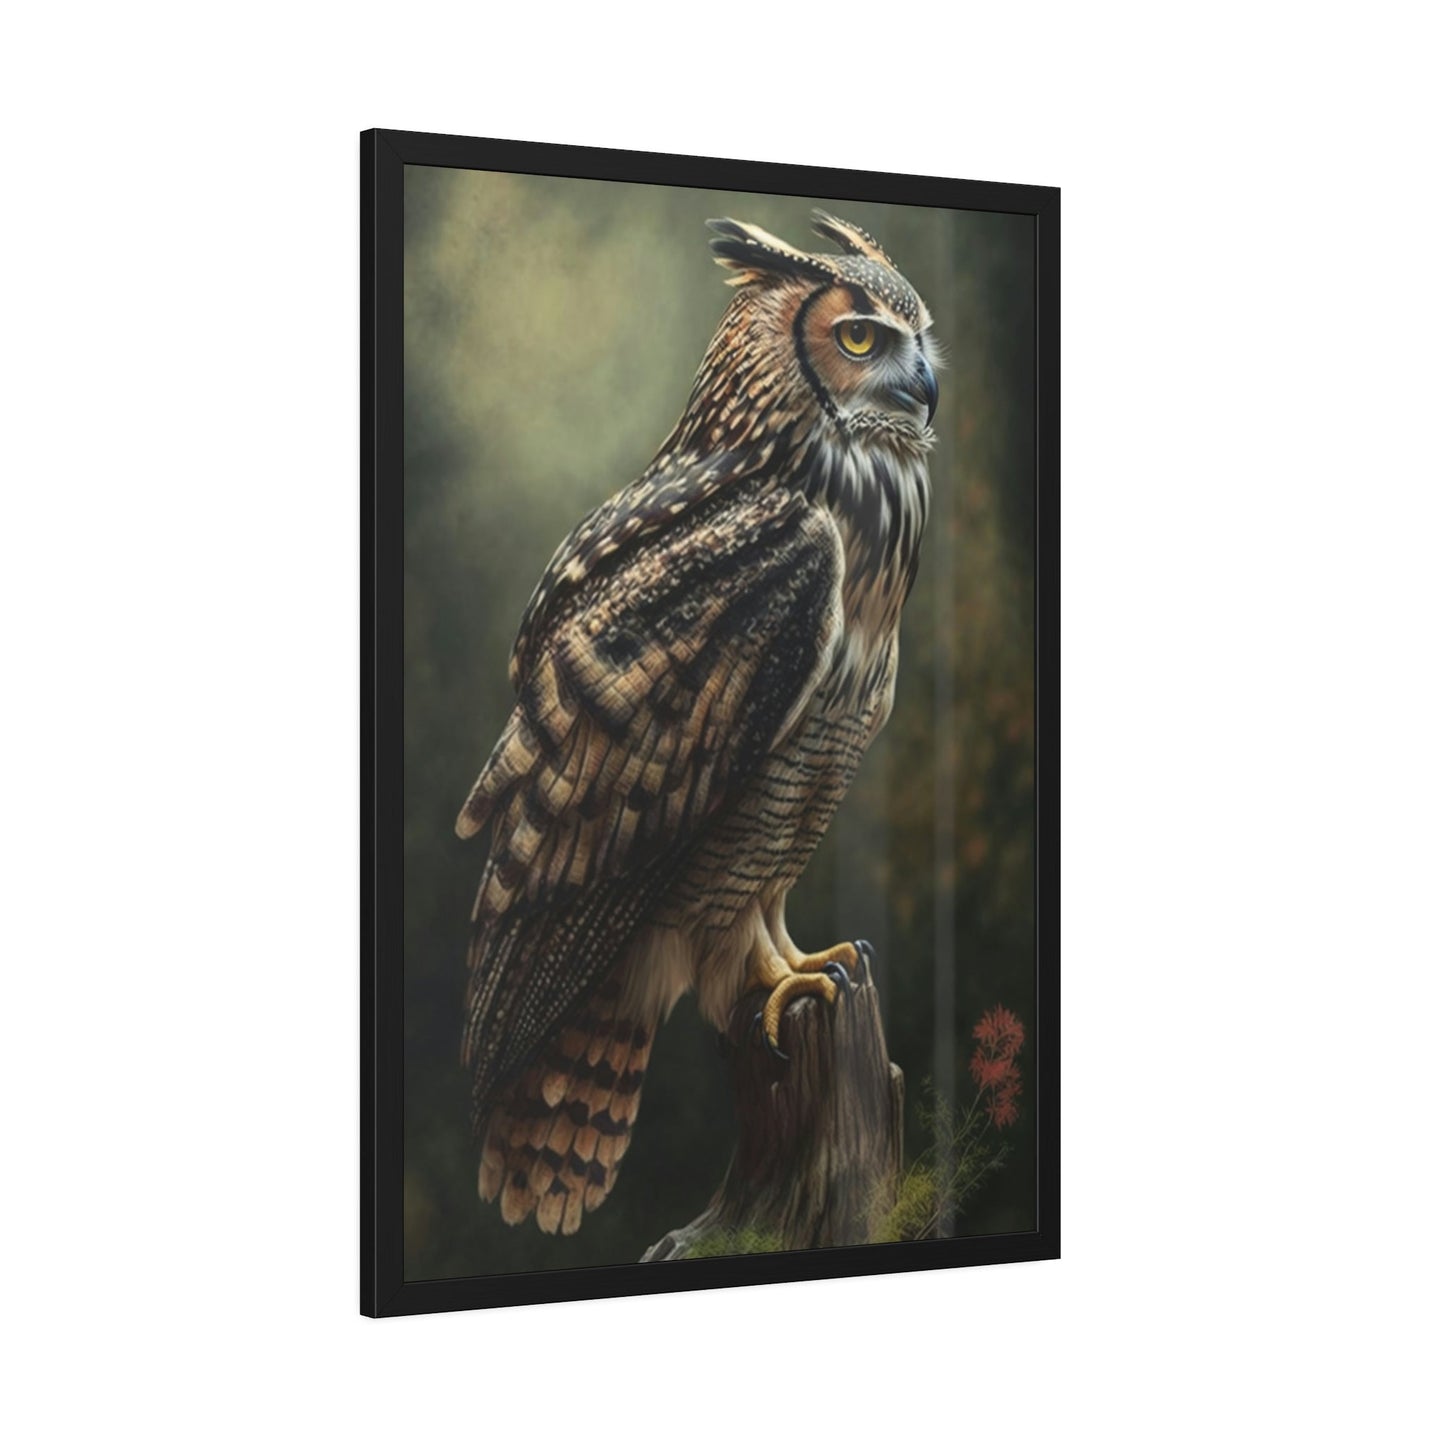 Eyes of the Forest: A Painting of an Owl in its Habitat